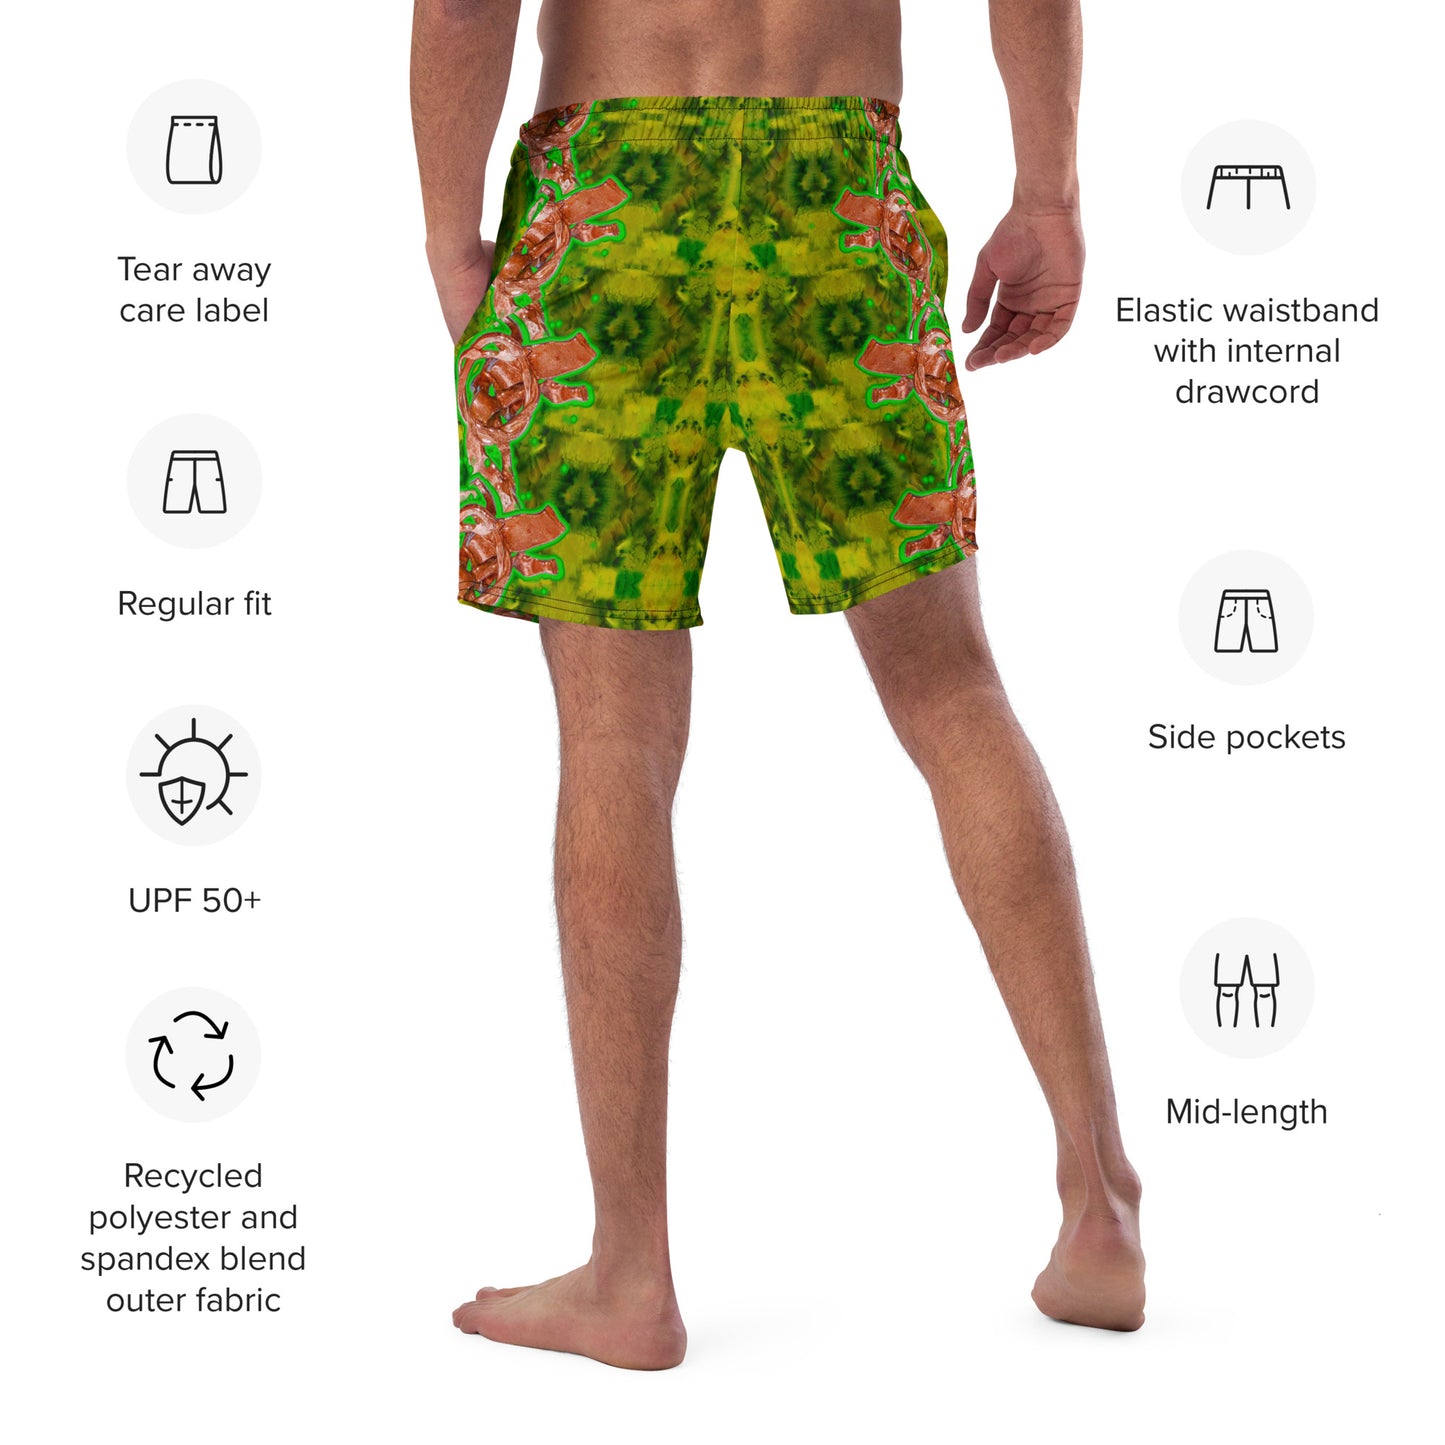 Swim Trunks (His/They)(Silvan Sward Sift Sigh 1-1) RJSTH@Fabric#5 RJSTHS2023 RJS